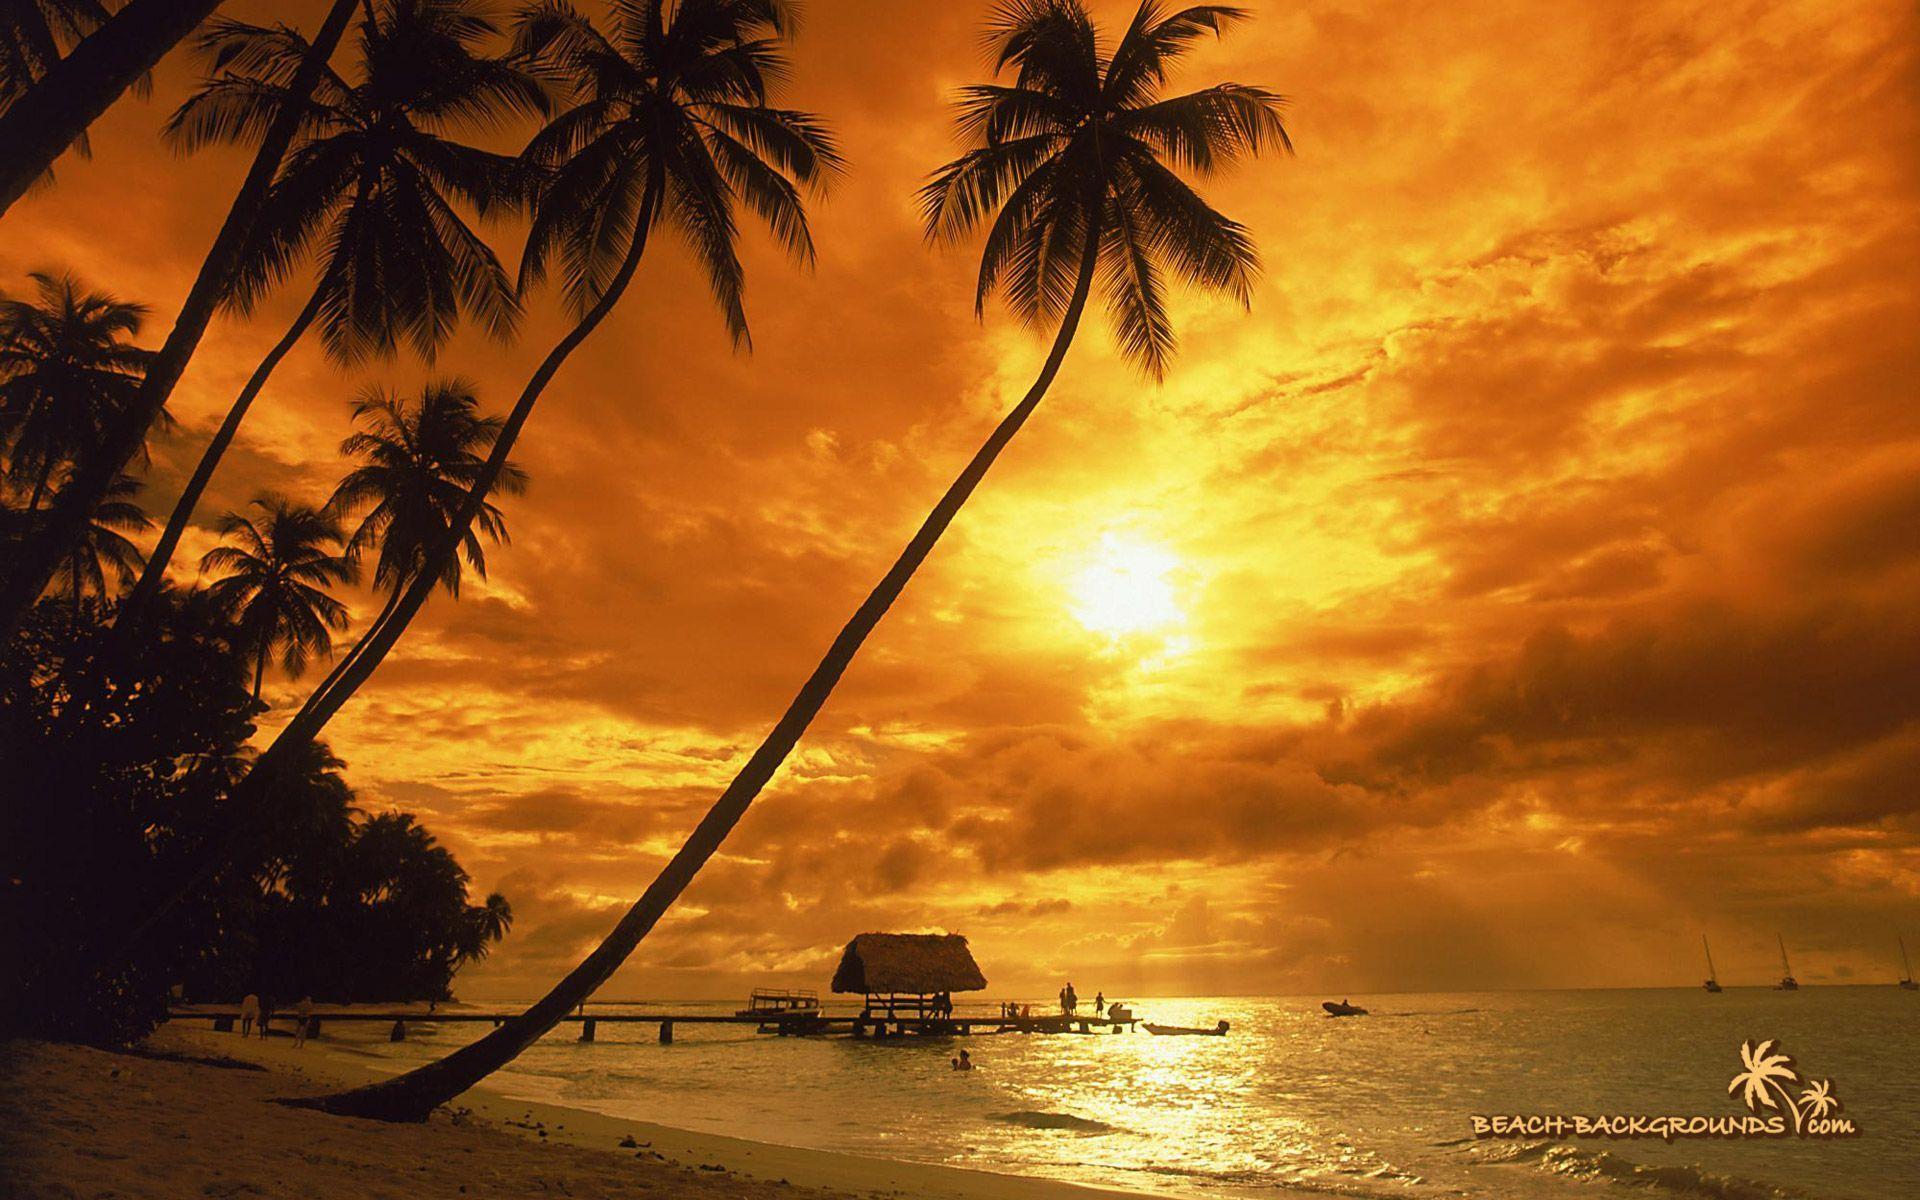 Tropical island Sunset Wallpapers